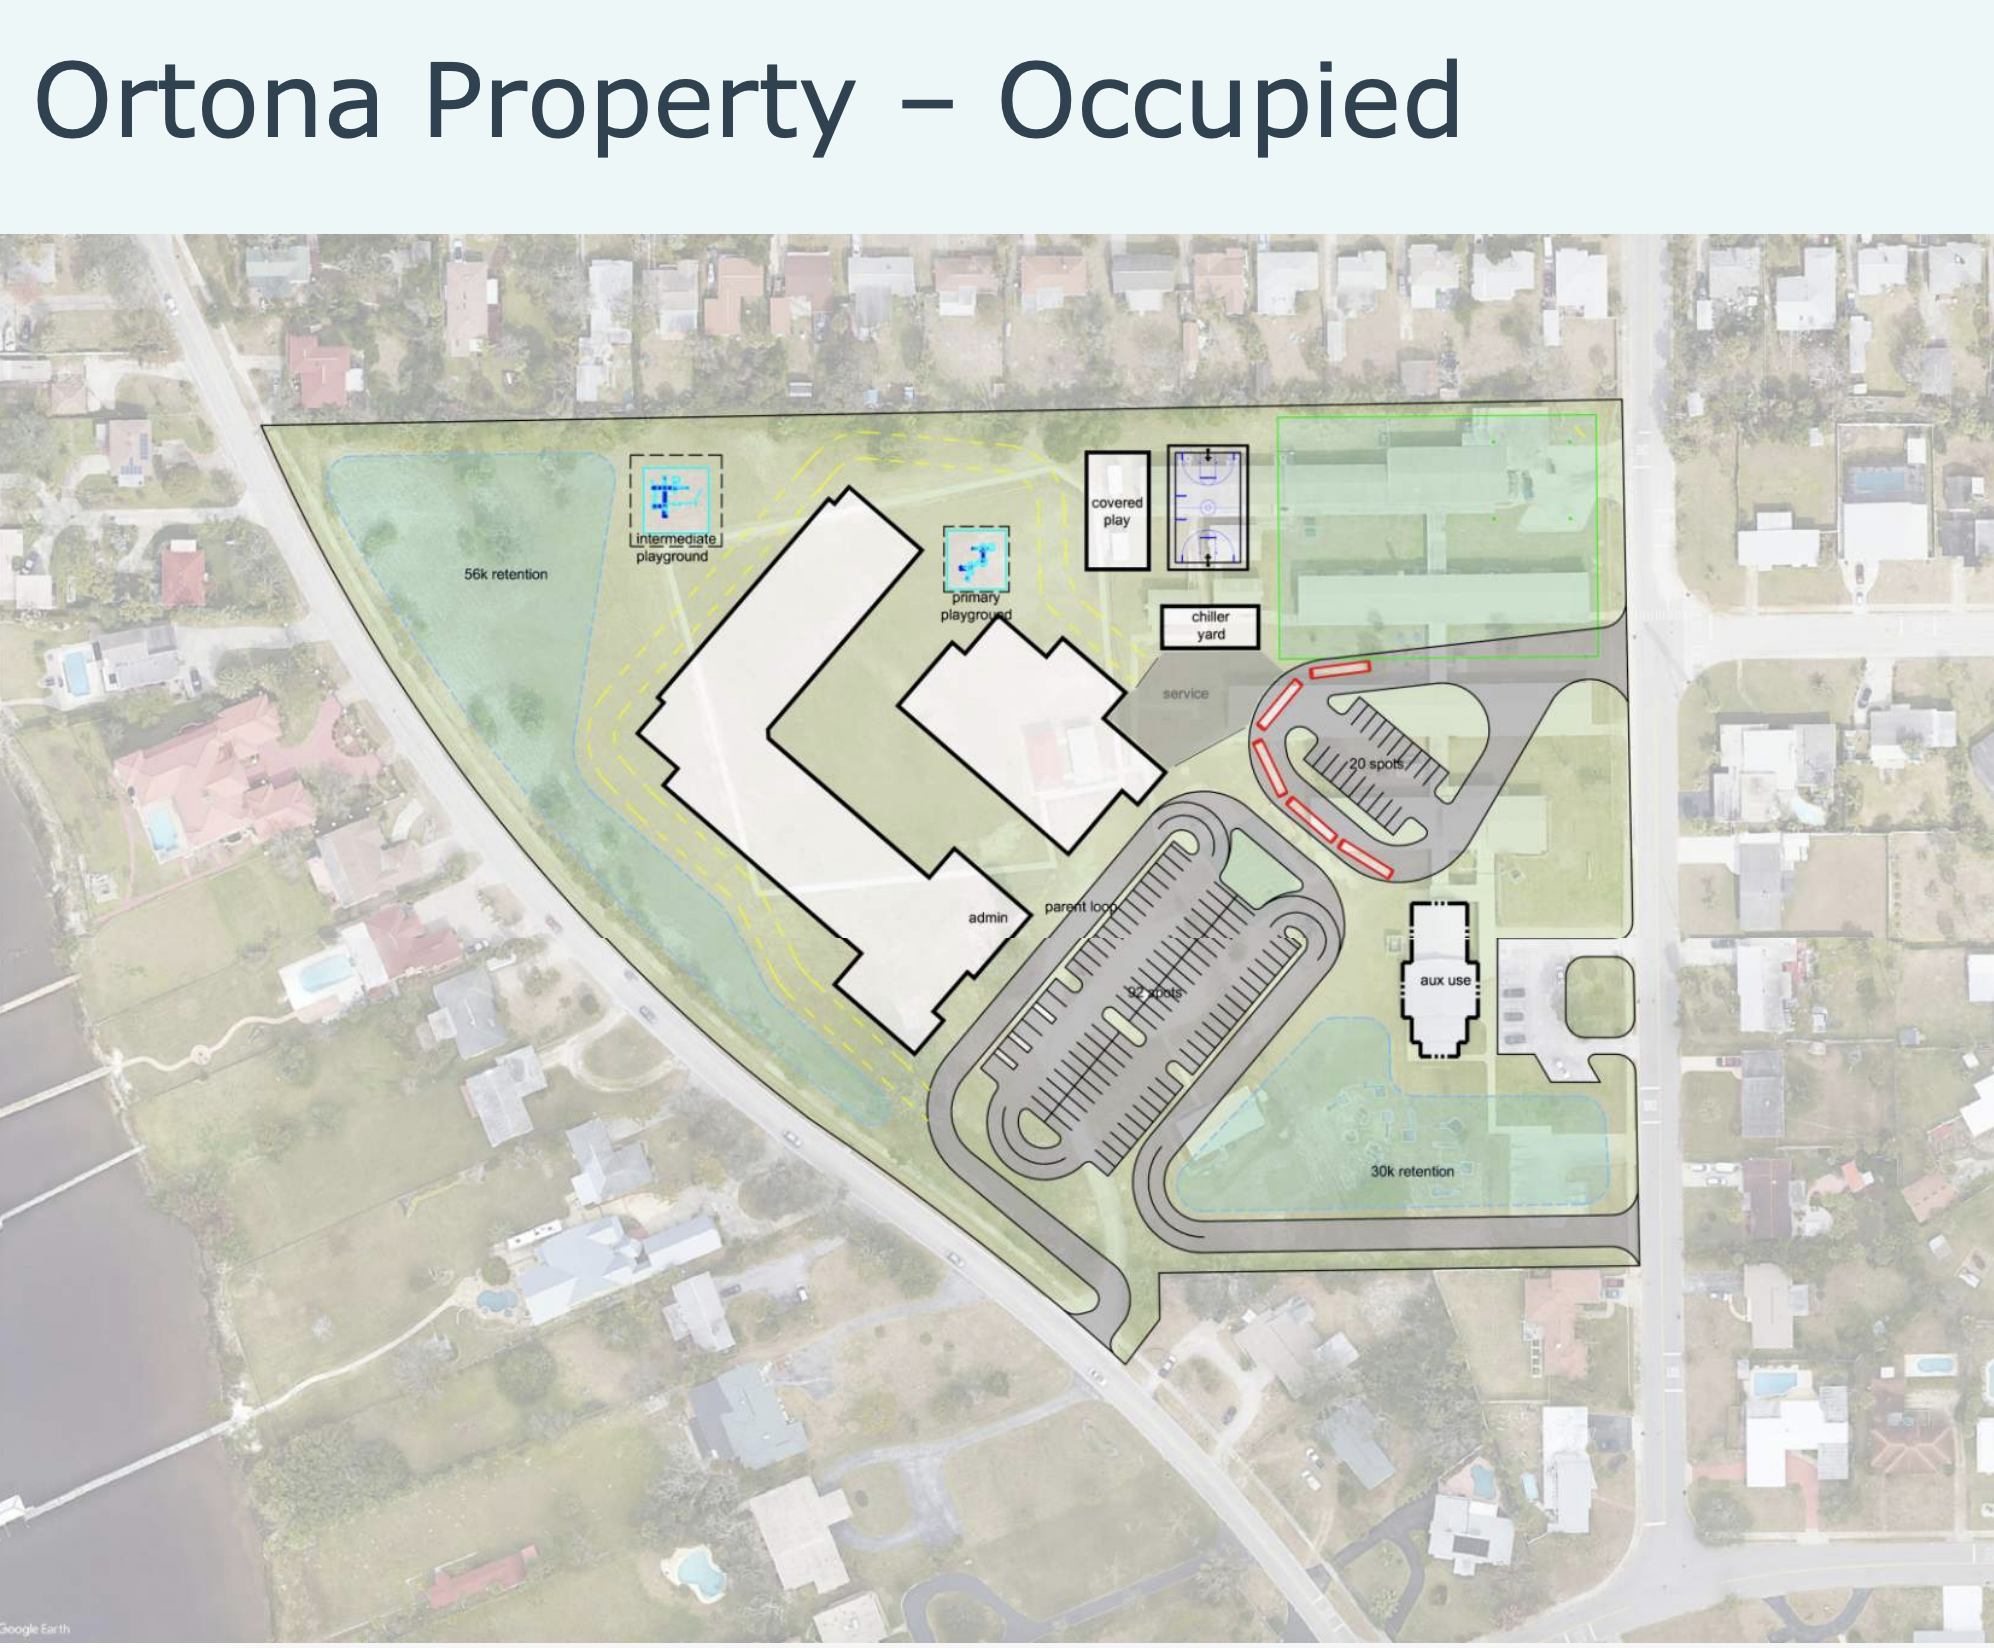 A plan showing what building on an occupied campus at Ortona would look like. Courtesy of Volusia County Schools/BRPH